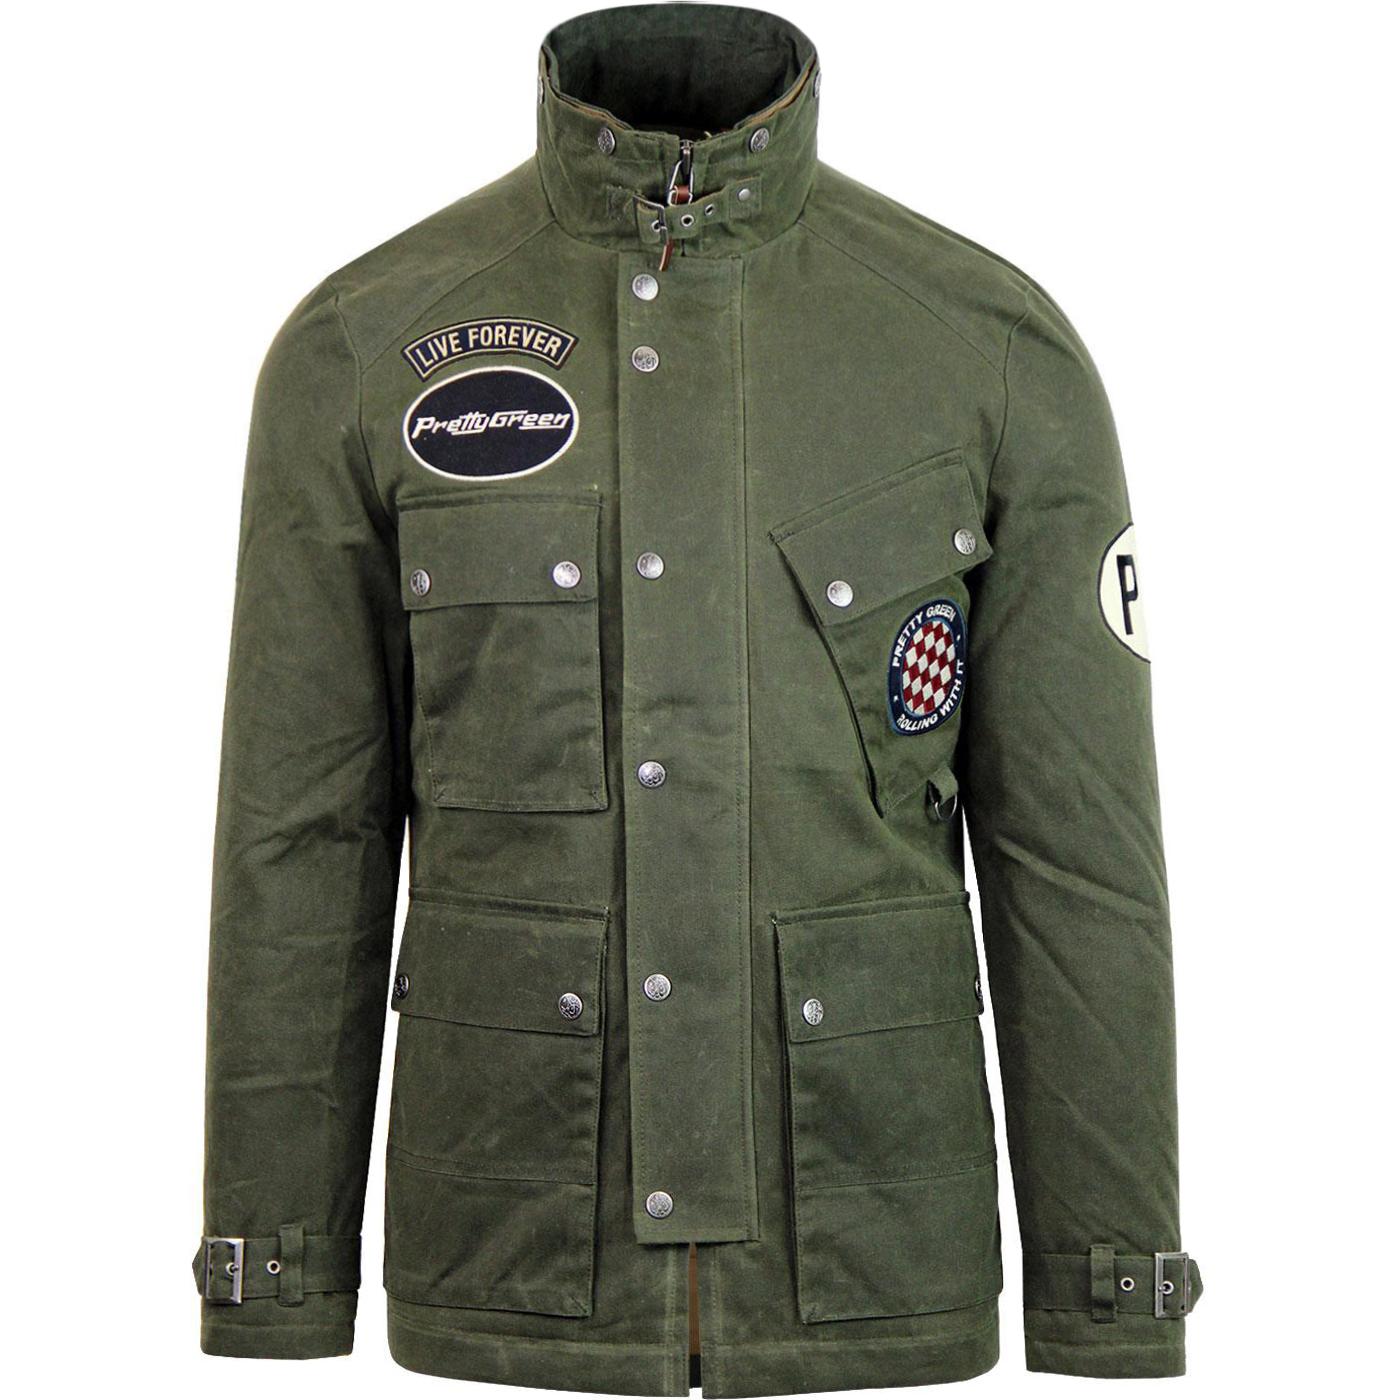 PRETTY GREEN 60's Waxed Cotton Motorcycle Jacket